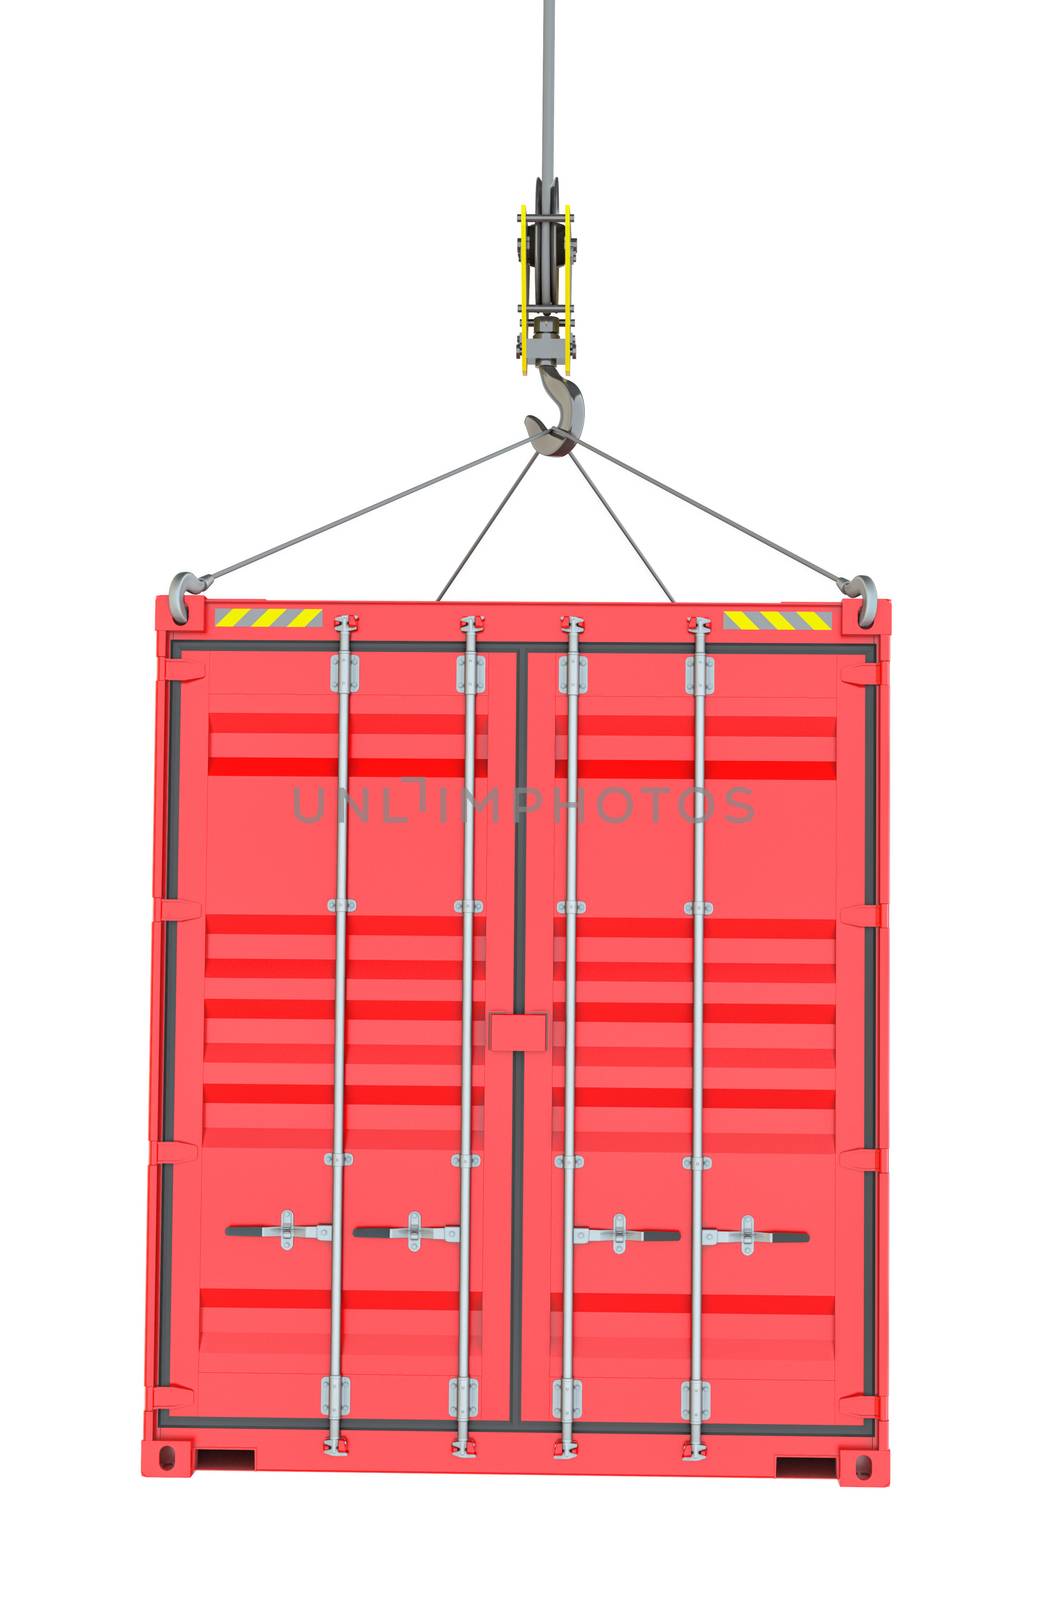 Red Cargo Container Hoisted By Hook, Isolated on White Background. 3D Illustration. Transportation Concept. Template For Your Design